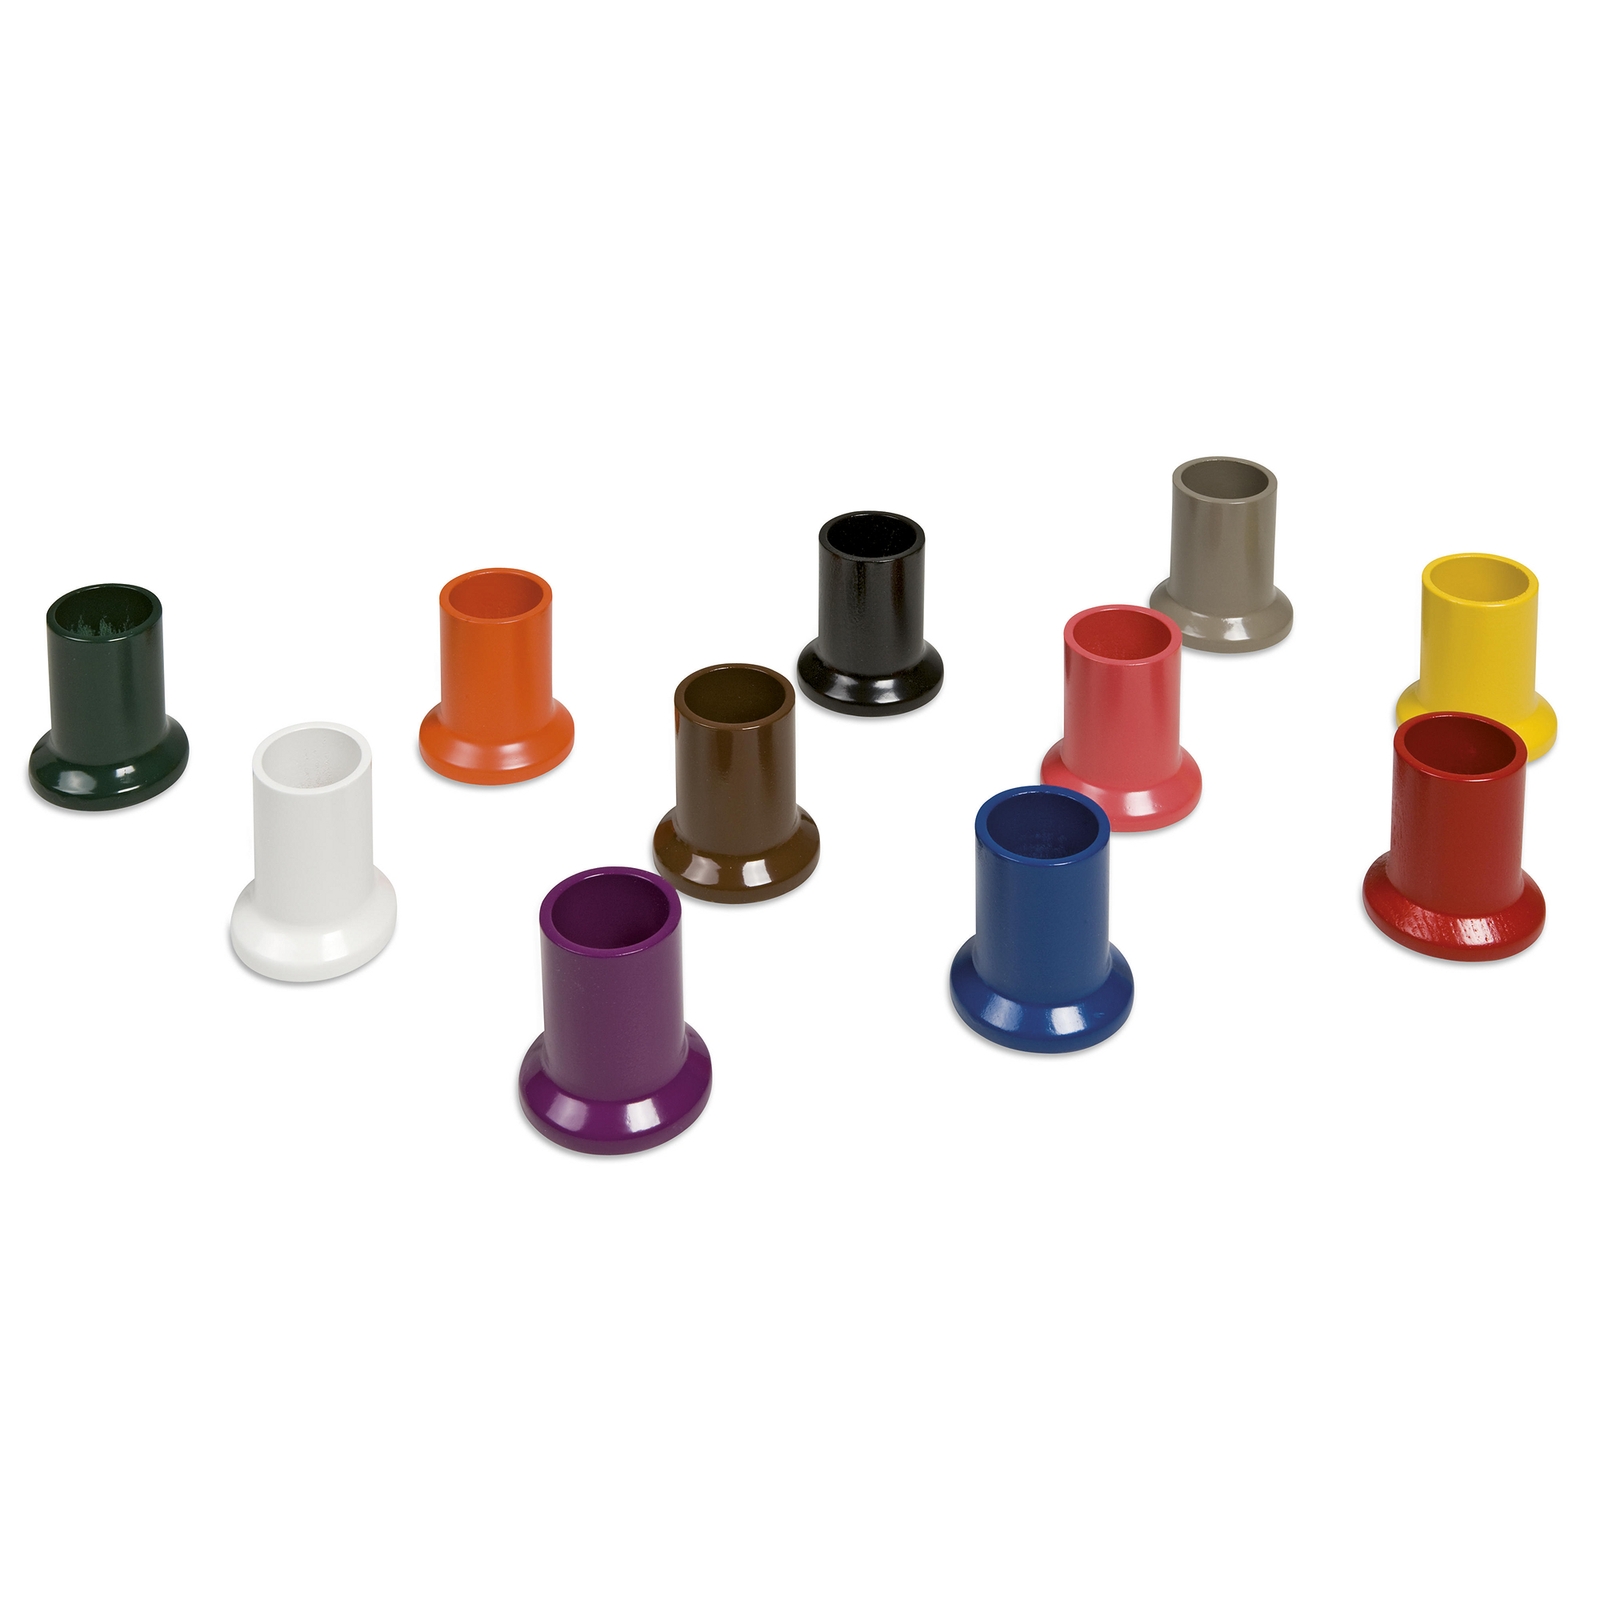 Coloured Inset Pencil Holders: Set Of 11 Coloured